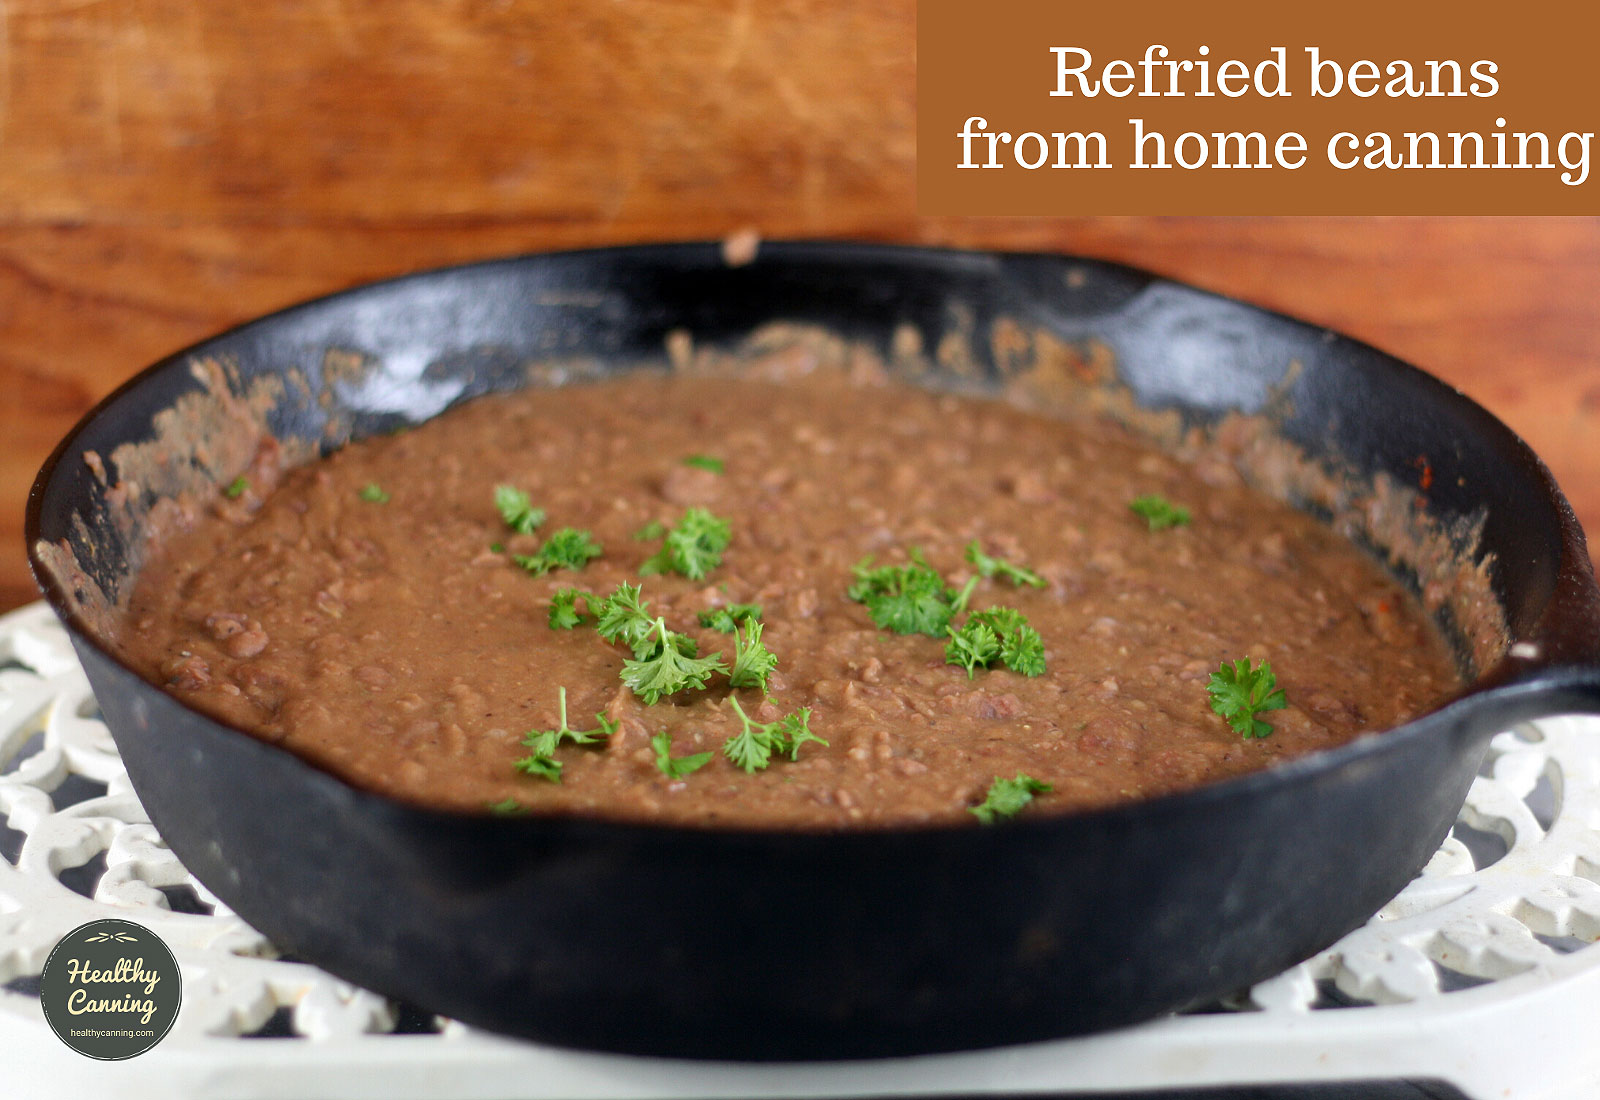 Refried beans from home canning